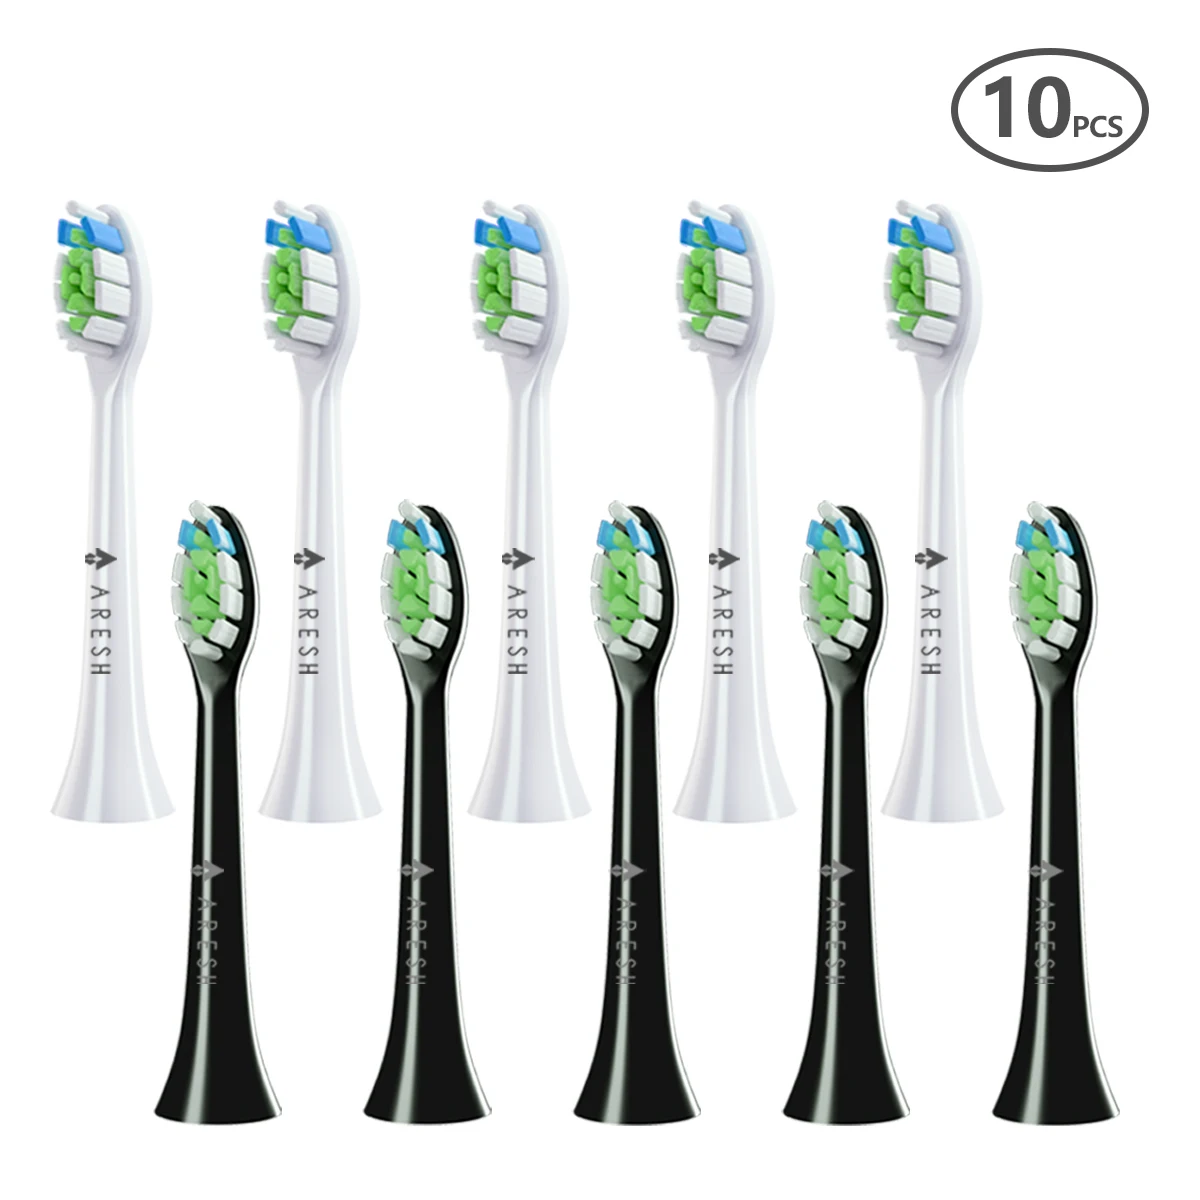 Enlarge 10PCS/Set Replaceable Brush Head For Philips Hx3,Hx6,Hx9 Series Toothbrush Clean Action Brush Heads Clean Sonicare Flexcare